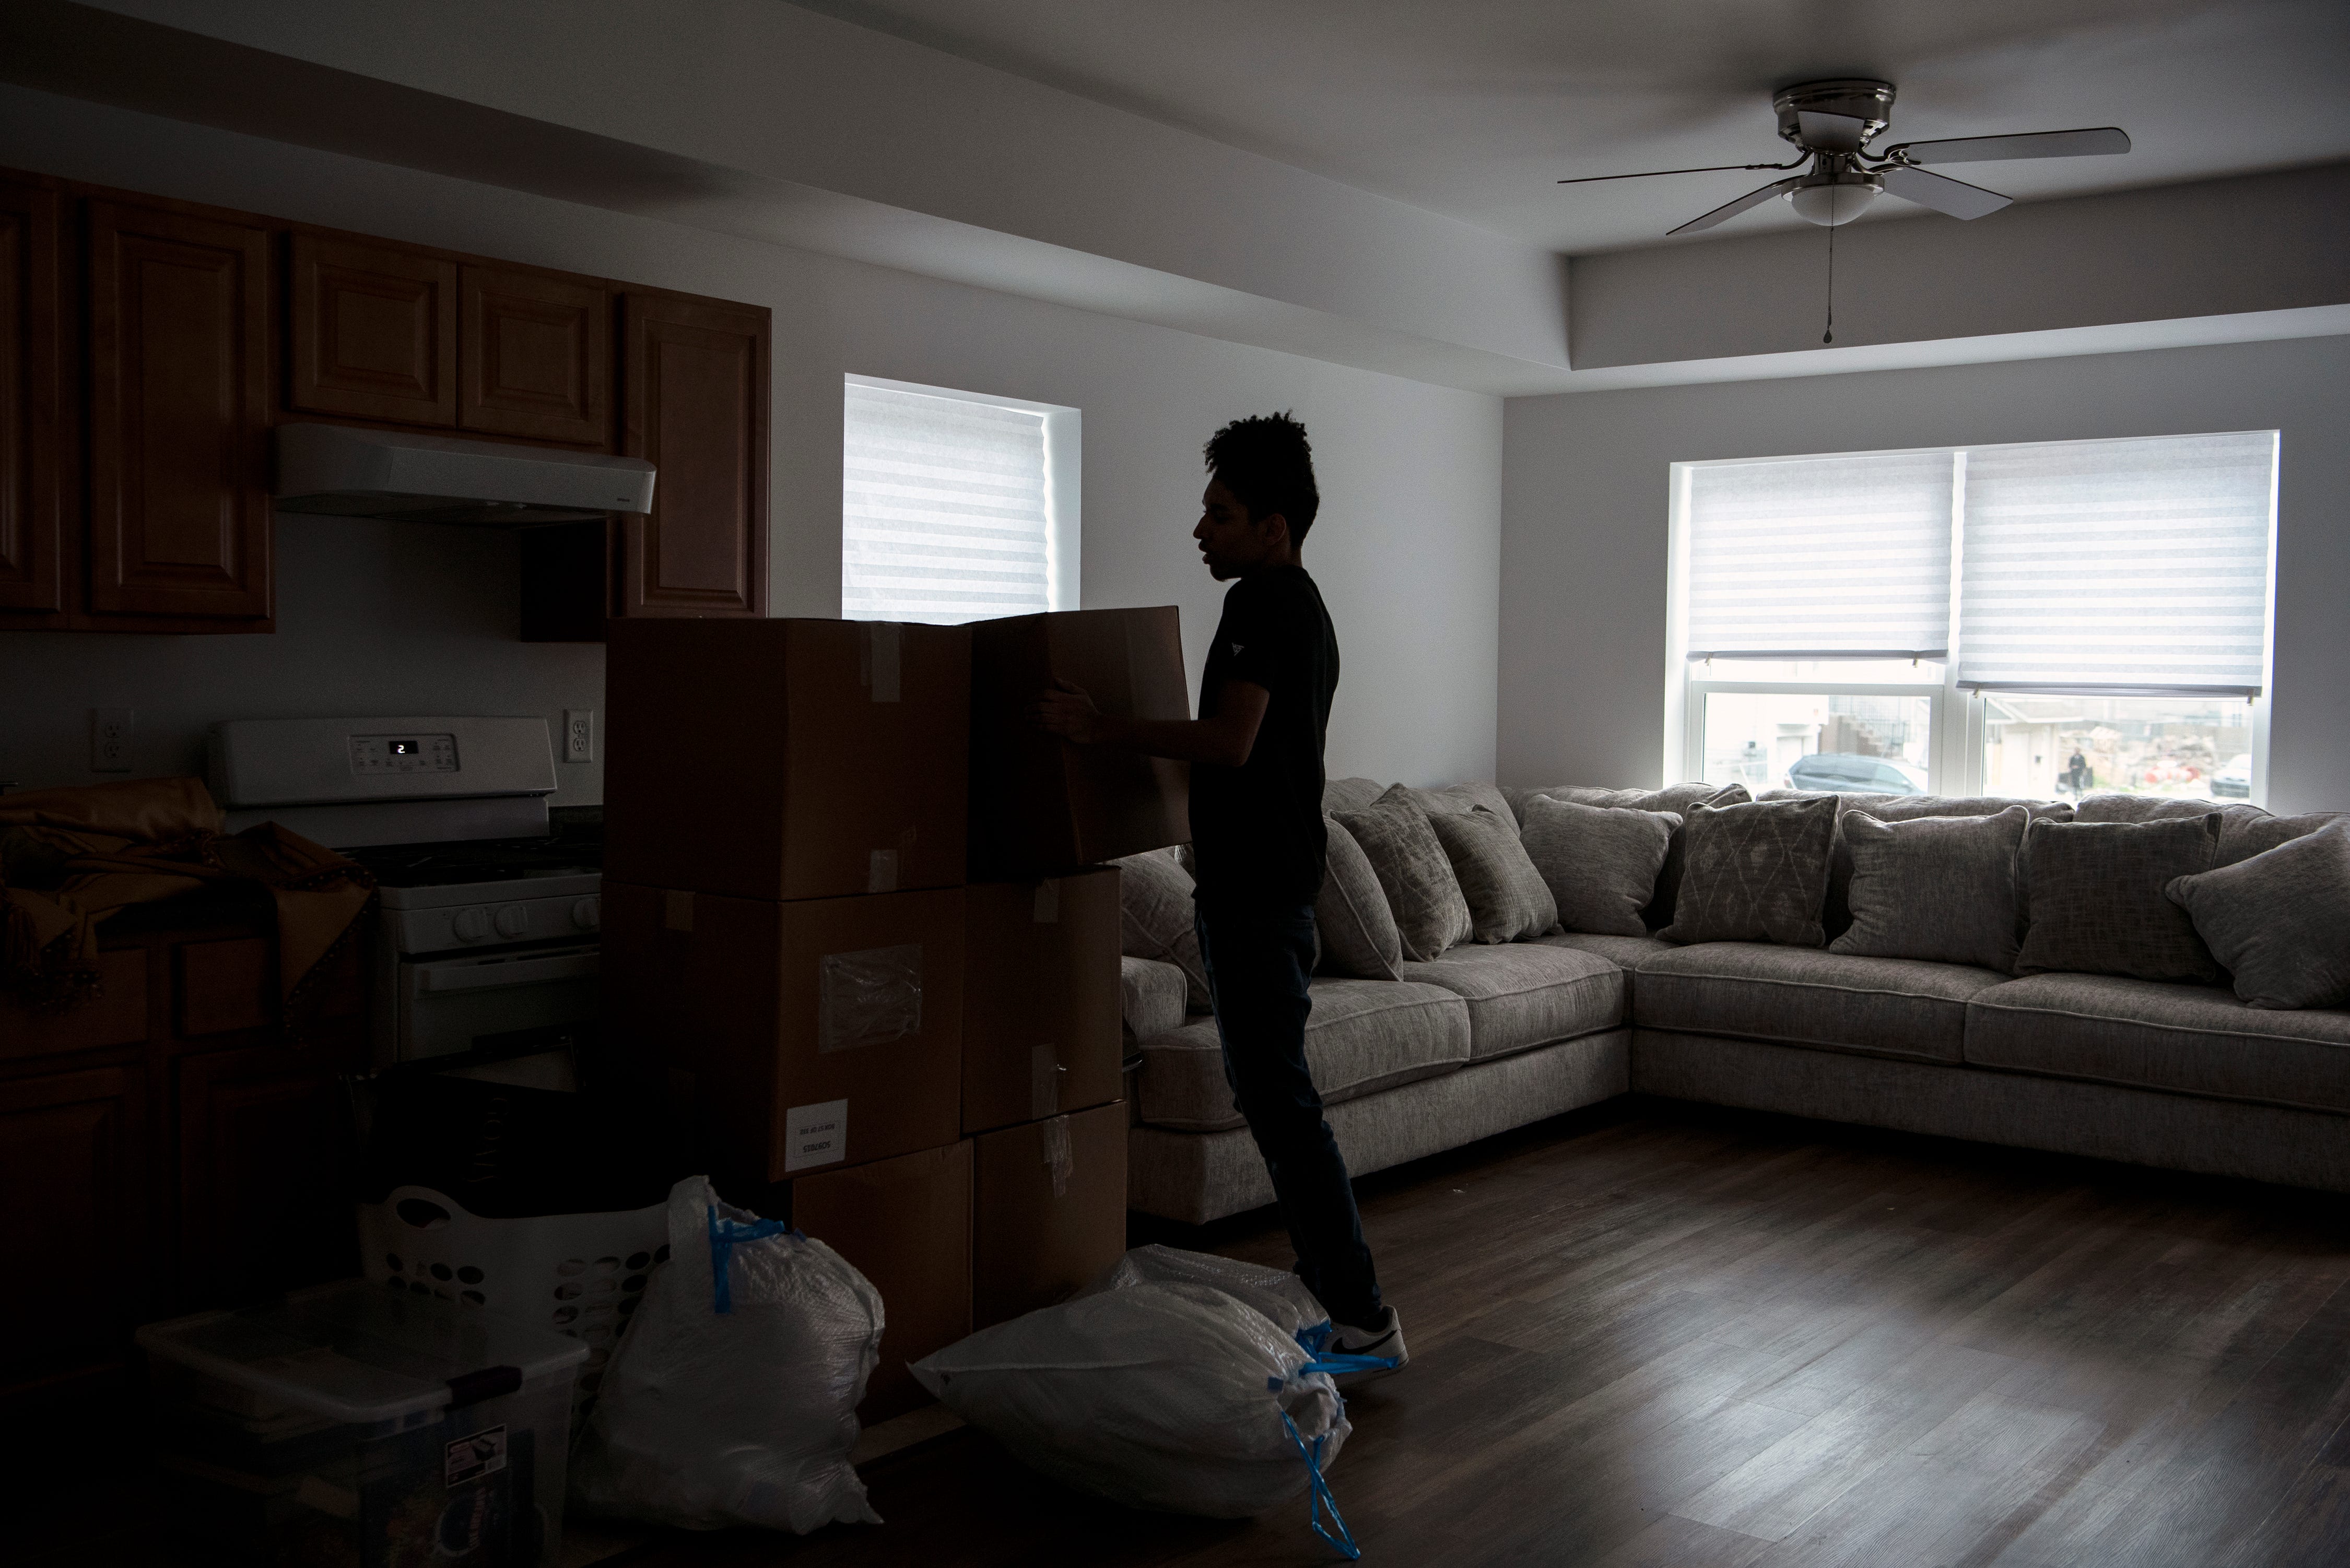 Carlos De Los Santos, 17, is excited to have his own bedroom for the first time in his life. Here, he helps unpack as his family start a new life in a Paterson Habitat for Humanity home on Hamilton Avenue.